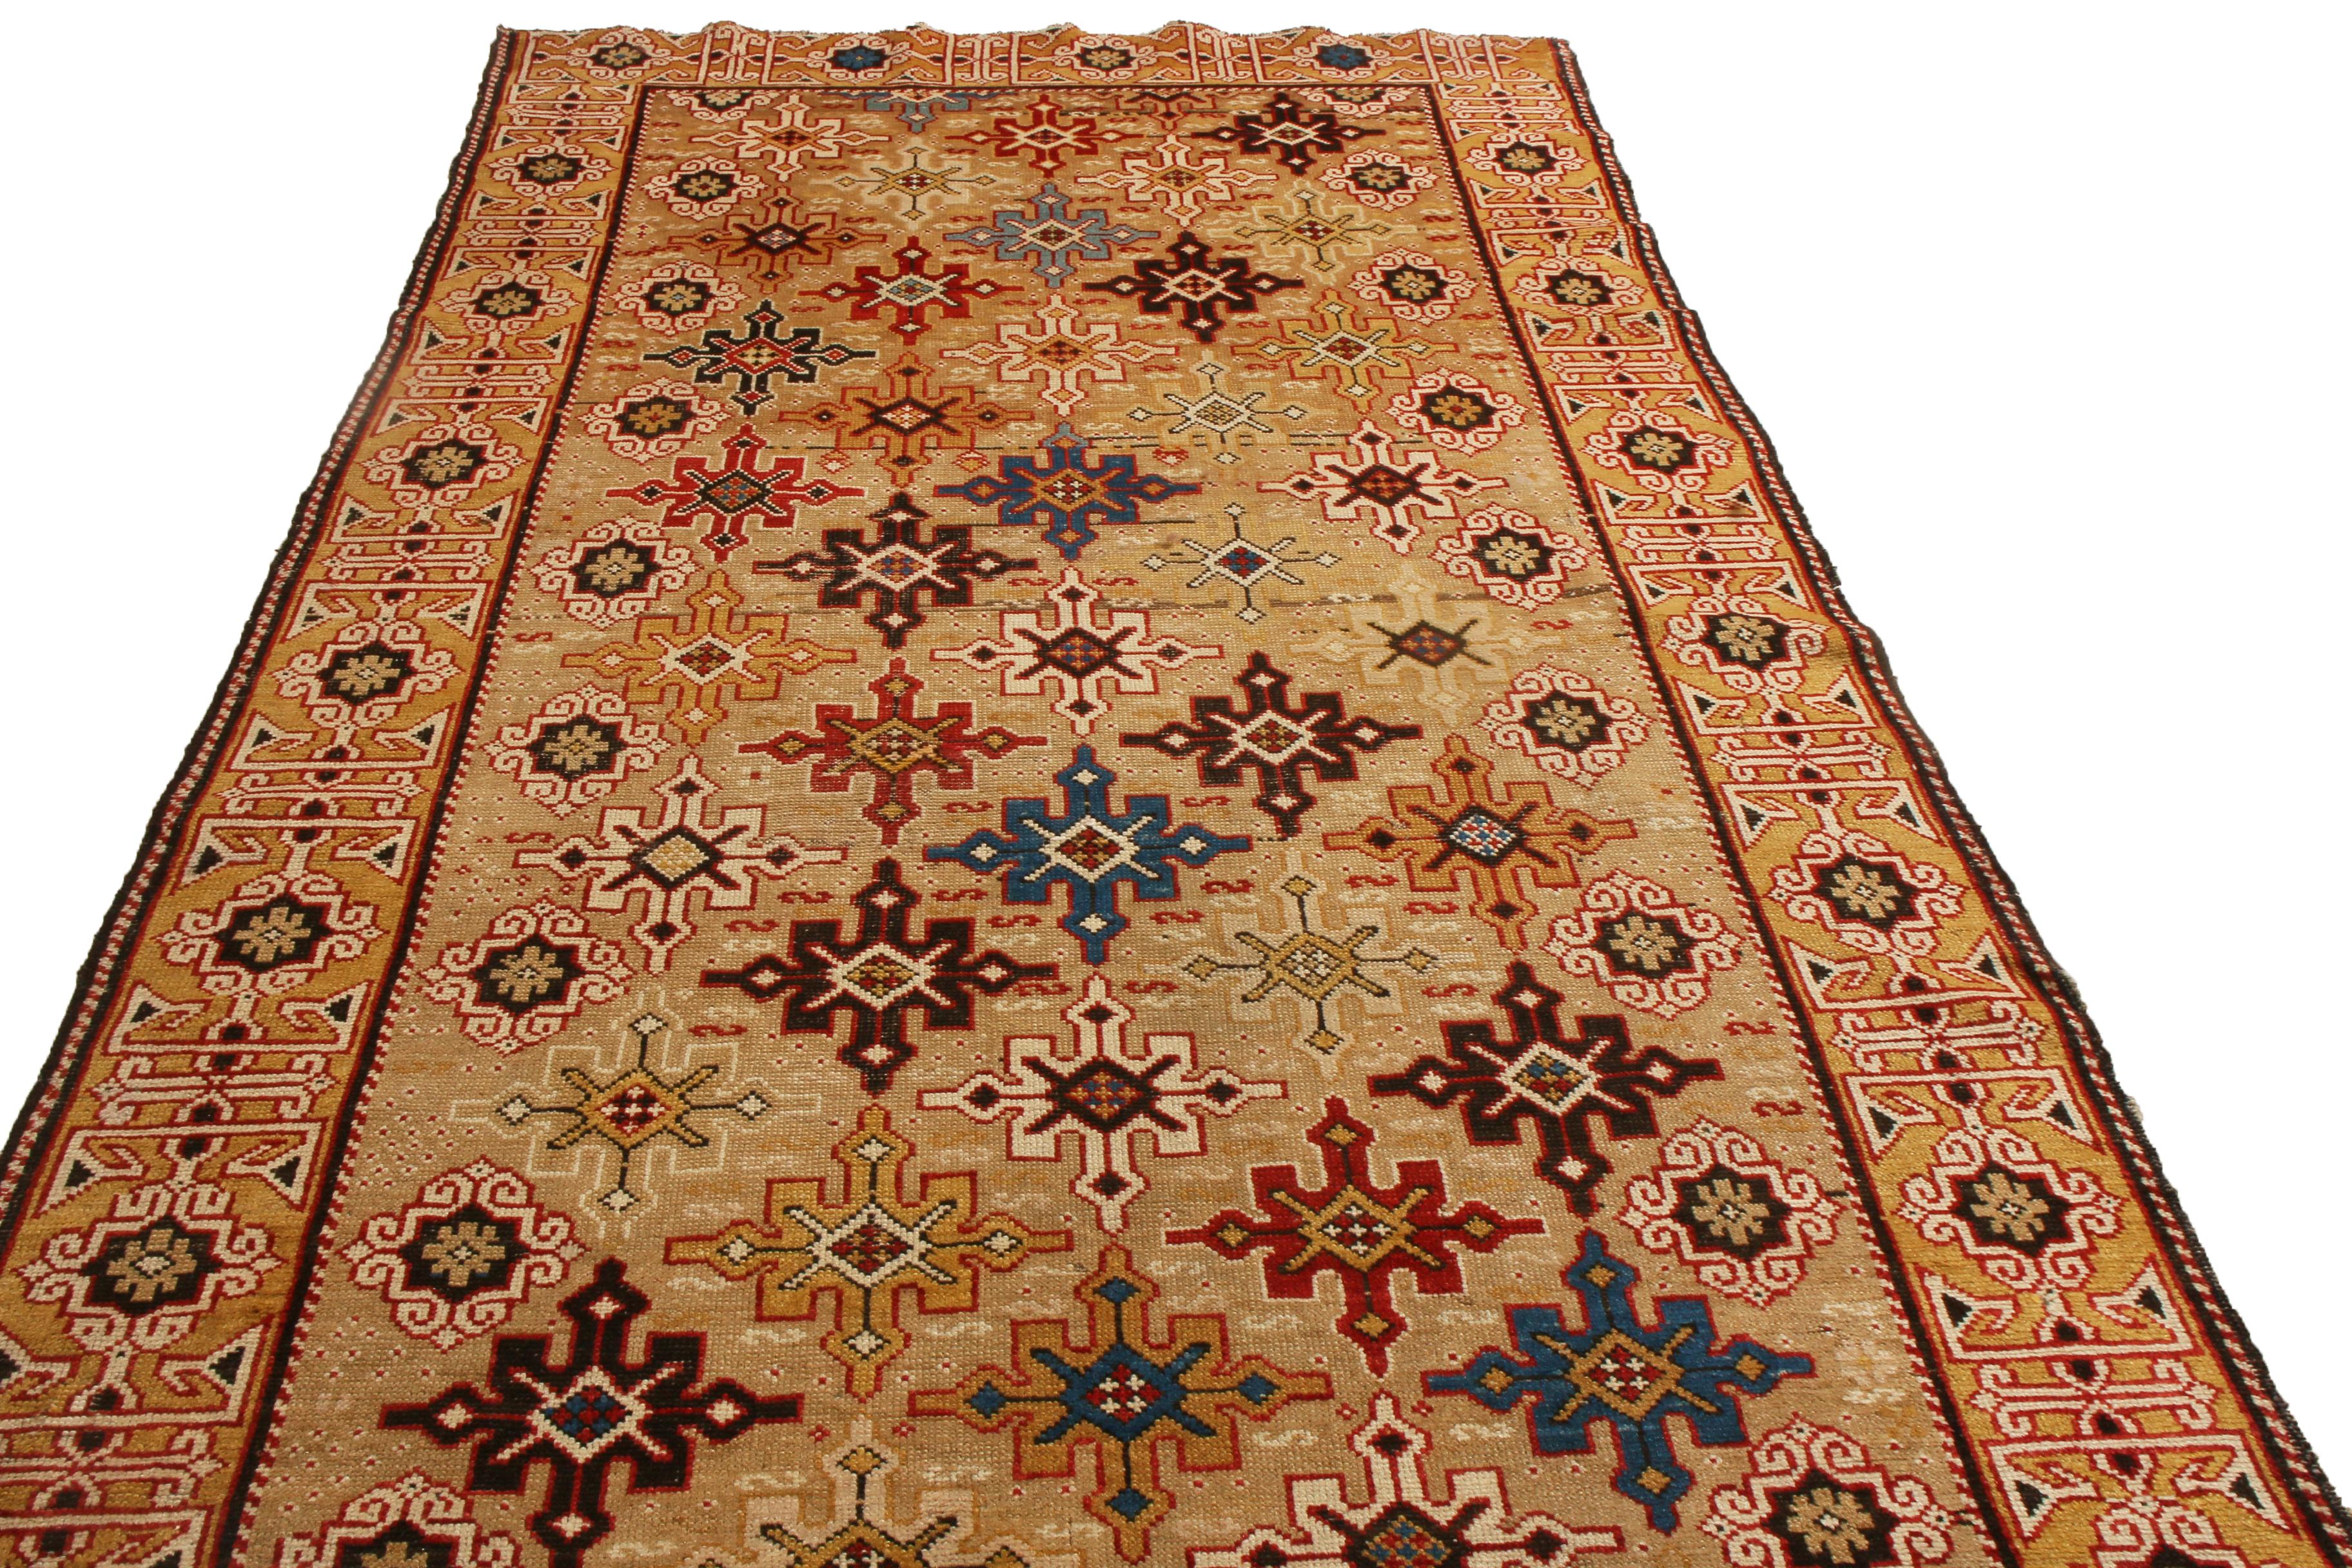 Originating from Russia between 1880-1890, this antique geometric runner enjoys a wrapping border and unique Kuba field design characterized by repeating crimson, blue, black, tan, and golden-yellow eight-pointed stars against an exceptionally rare,